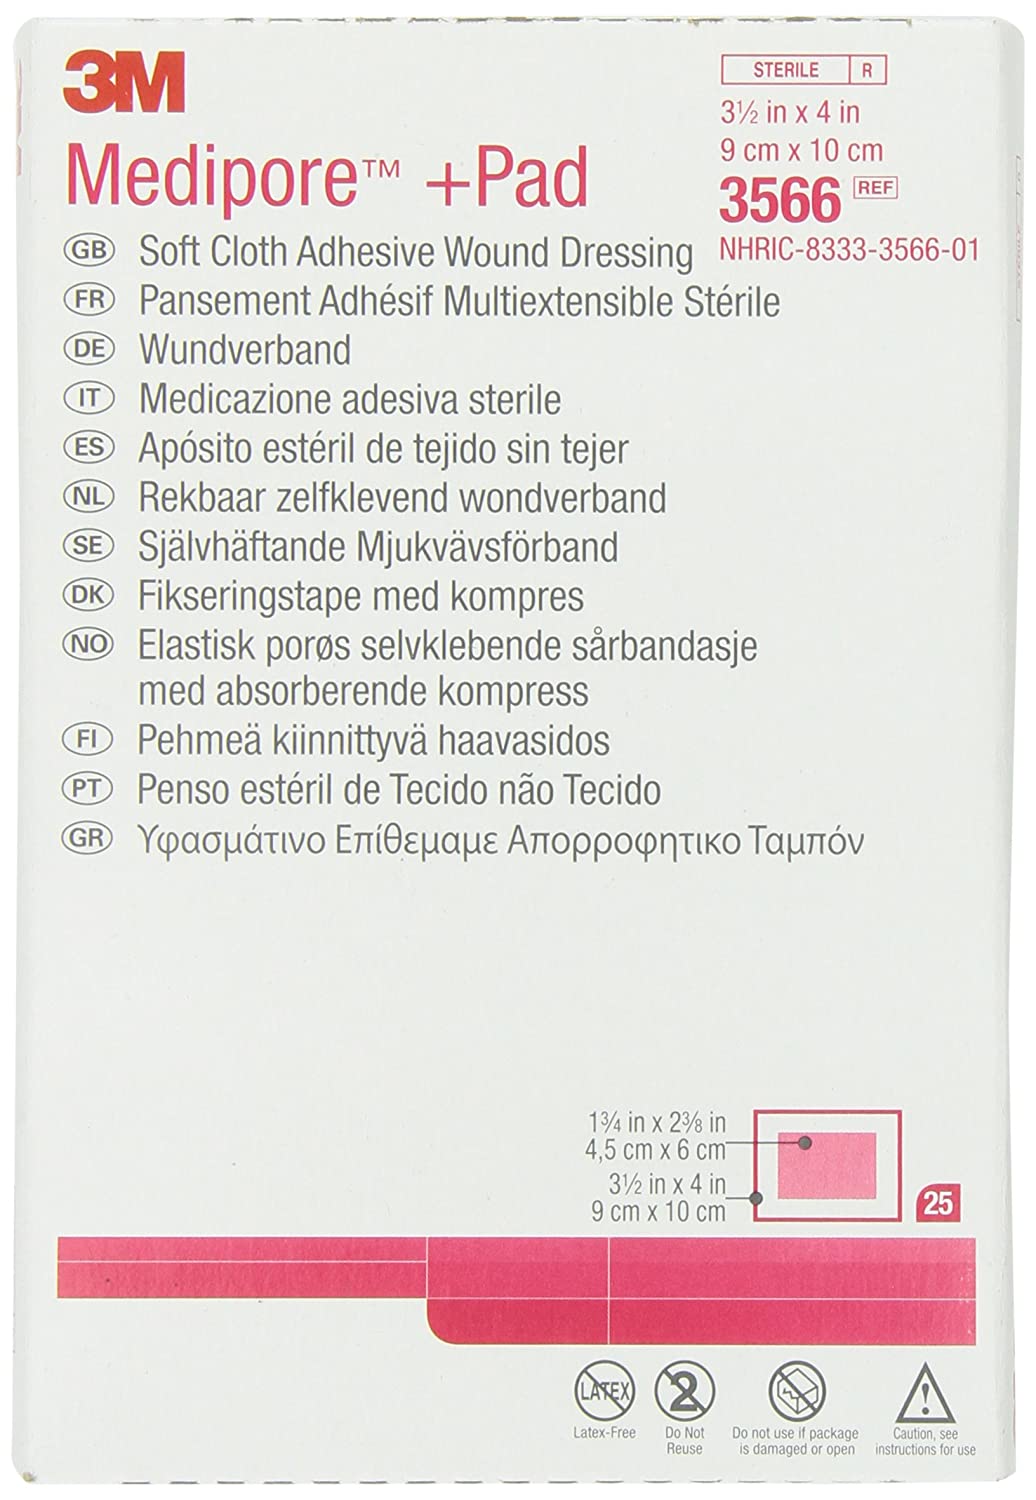 3M Medipore +Pad 3566 - Soft Cloth Adhesive Wound Dressing, Absorbent, Sterile, Breathable, Hypoallergenic, Latex-free - Dressing Size 3 1/2" x 4", Pad Size 1 3/4" x 2 3/8", Box of 25